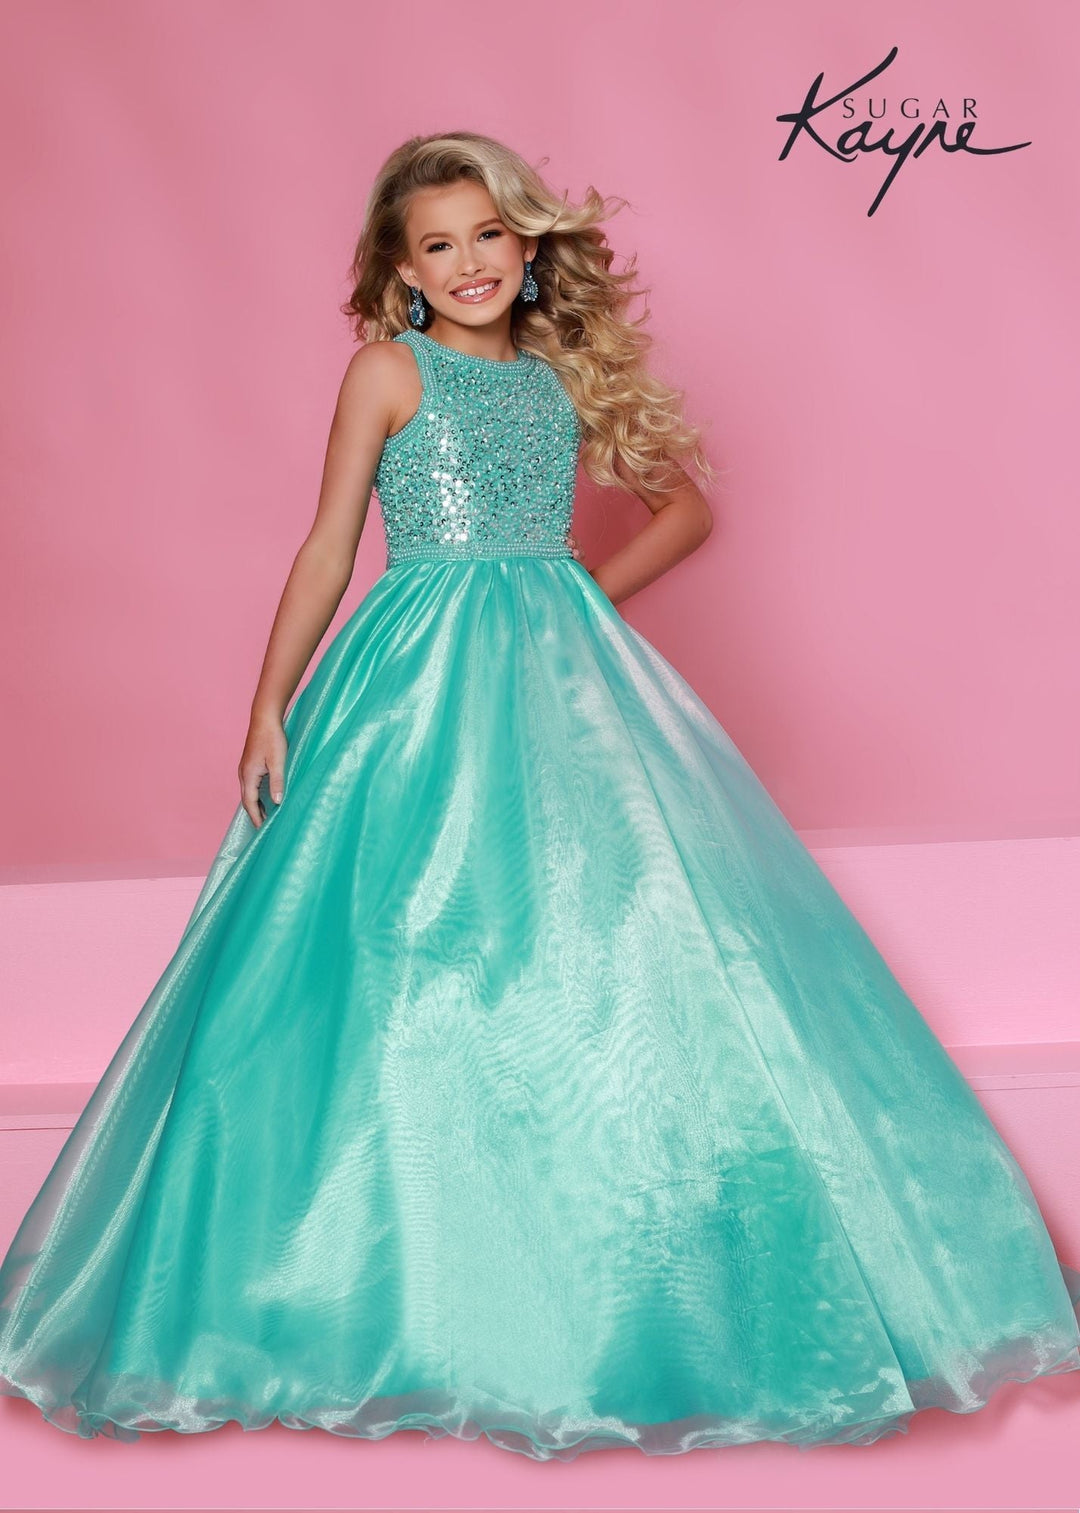 Sugar Kayne C186 Girls and Preteen Pageant Dress Sequin and Pearl Top Cutout Heart Back Organza Long Skirt with Train - FOSTANI